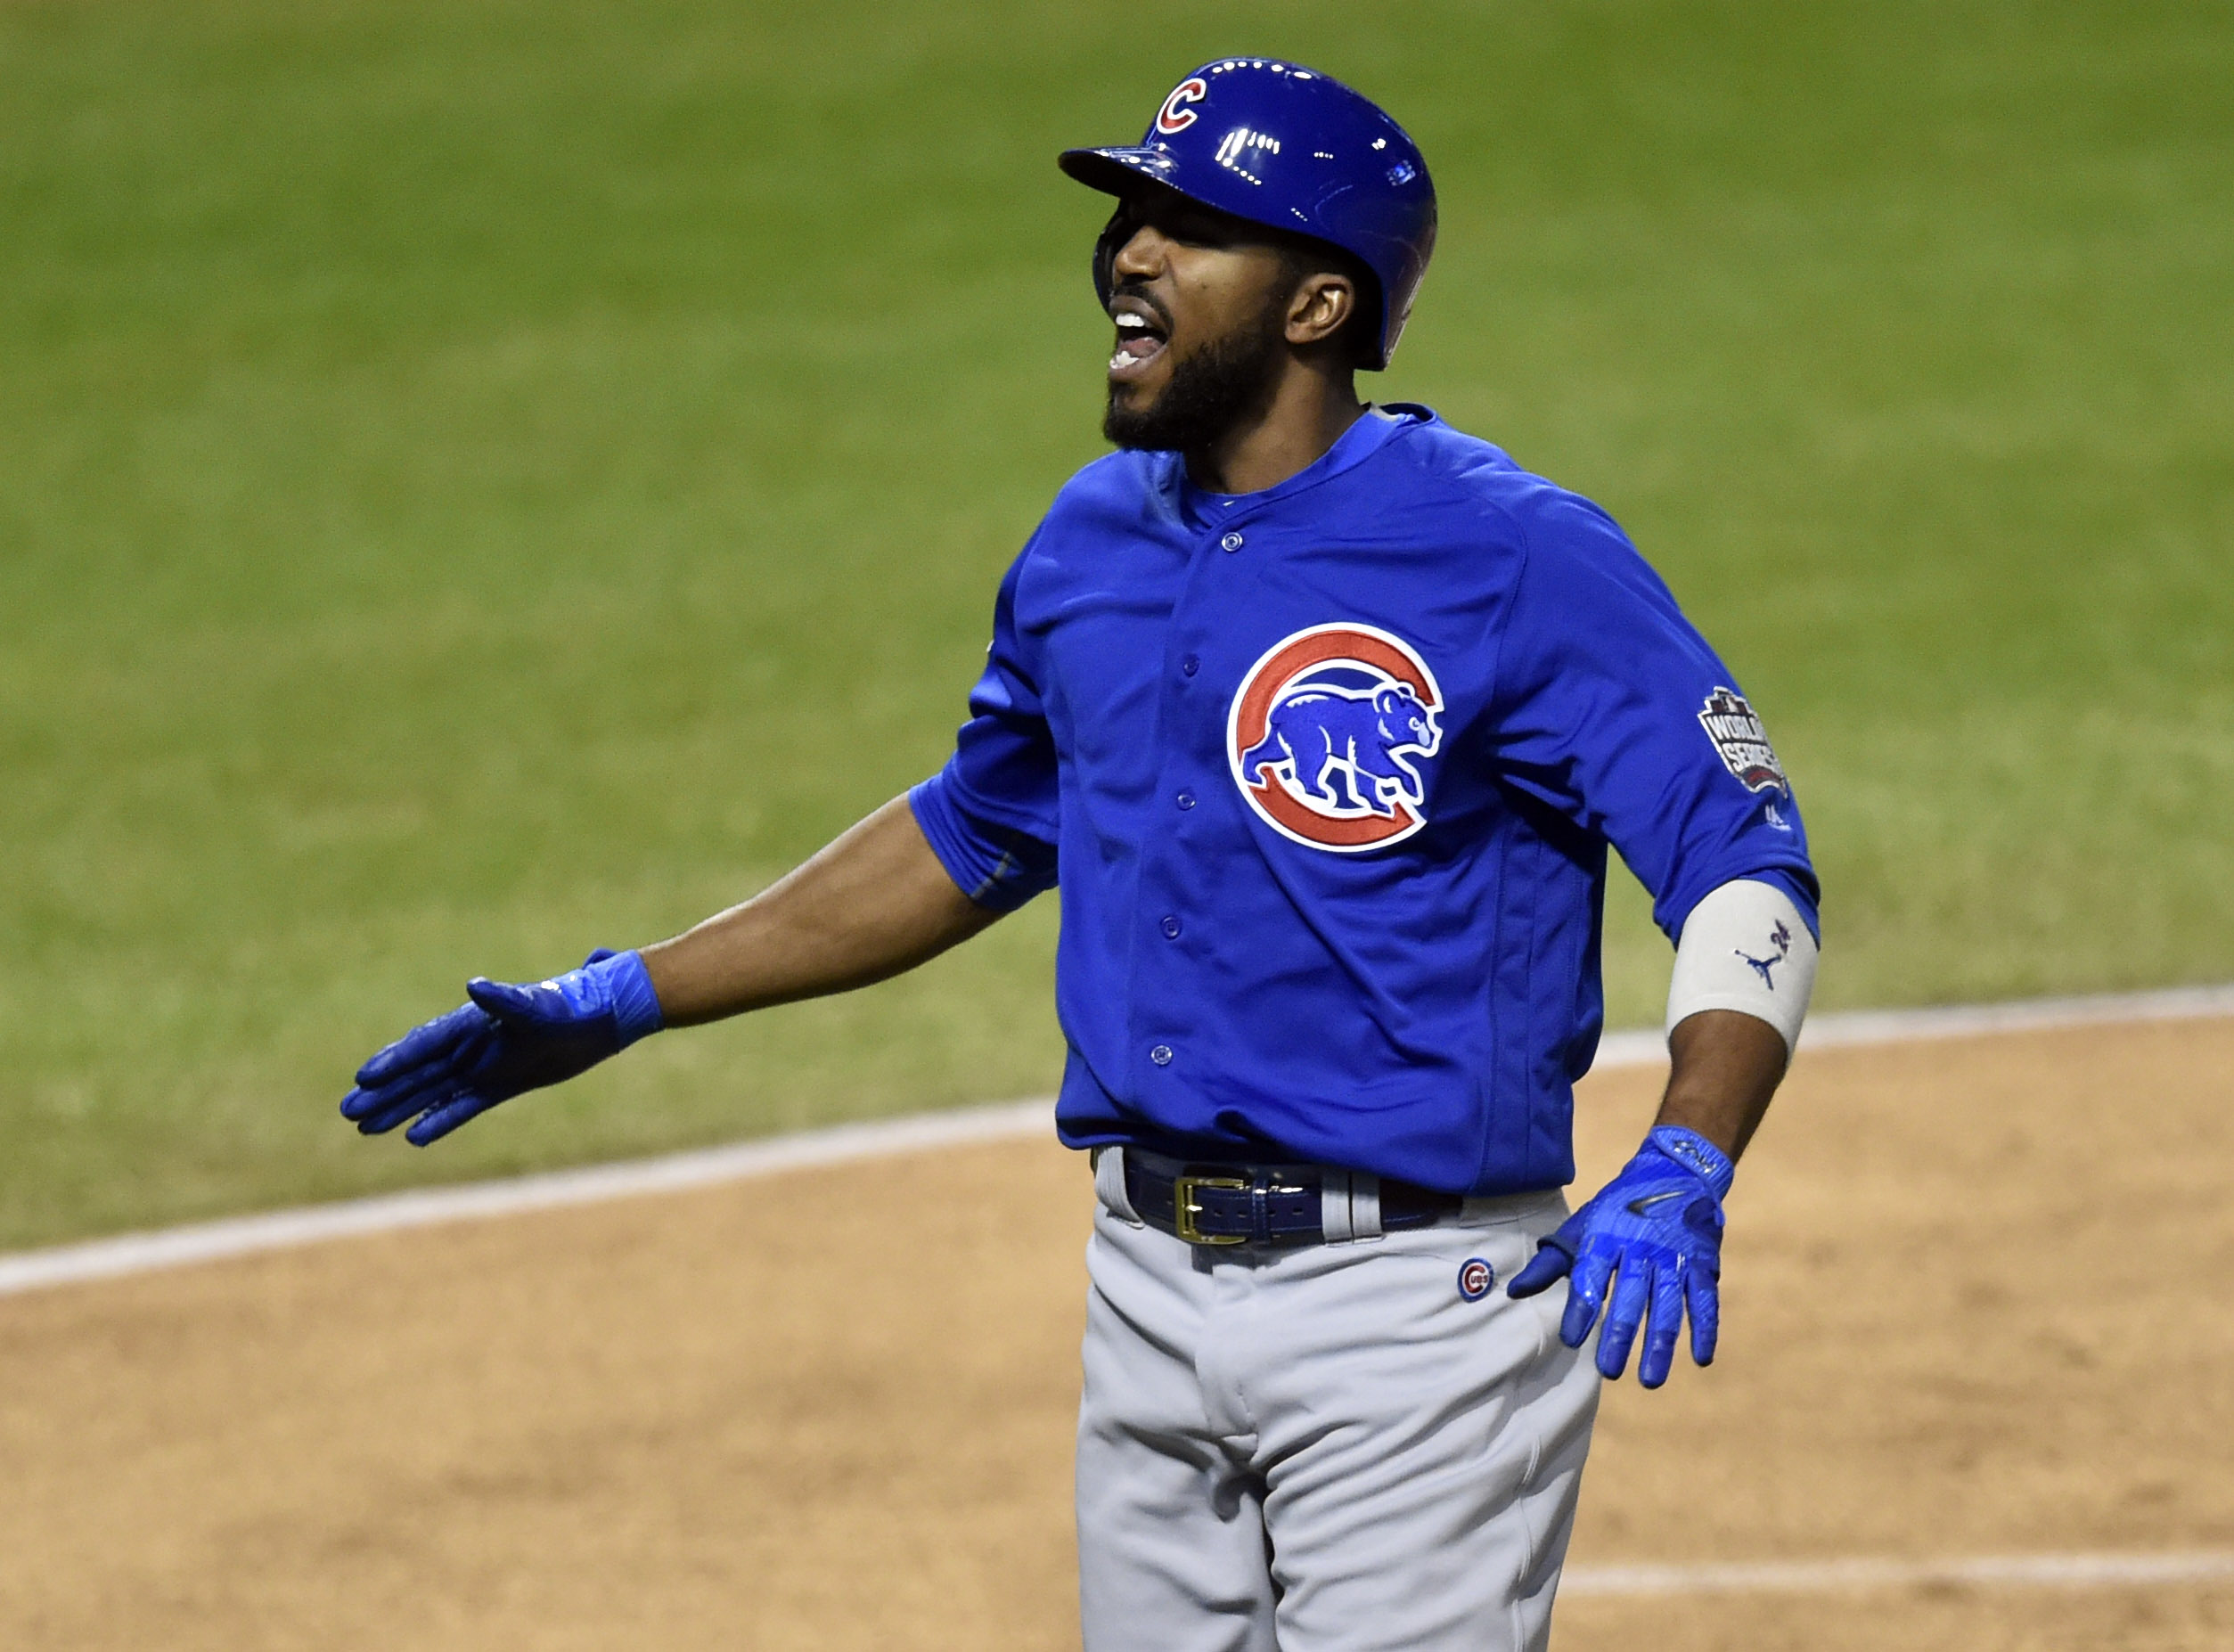 New York Mets: If Yoenis Cespedes Leaves, Dexter Fowler Could Be In Play 